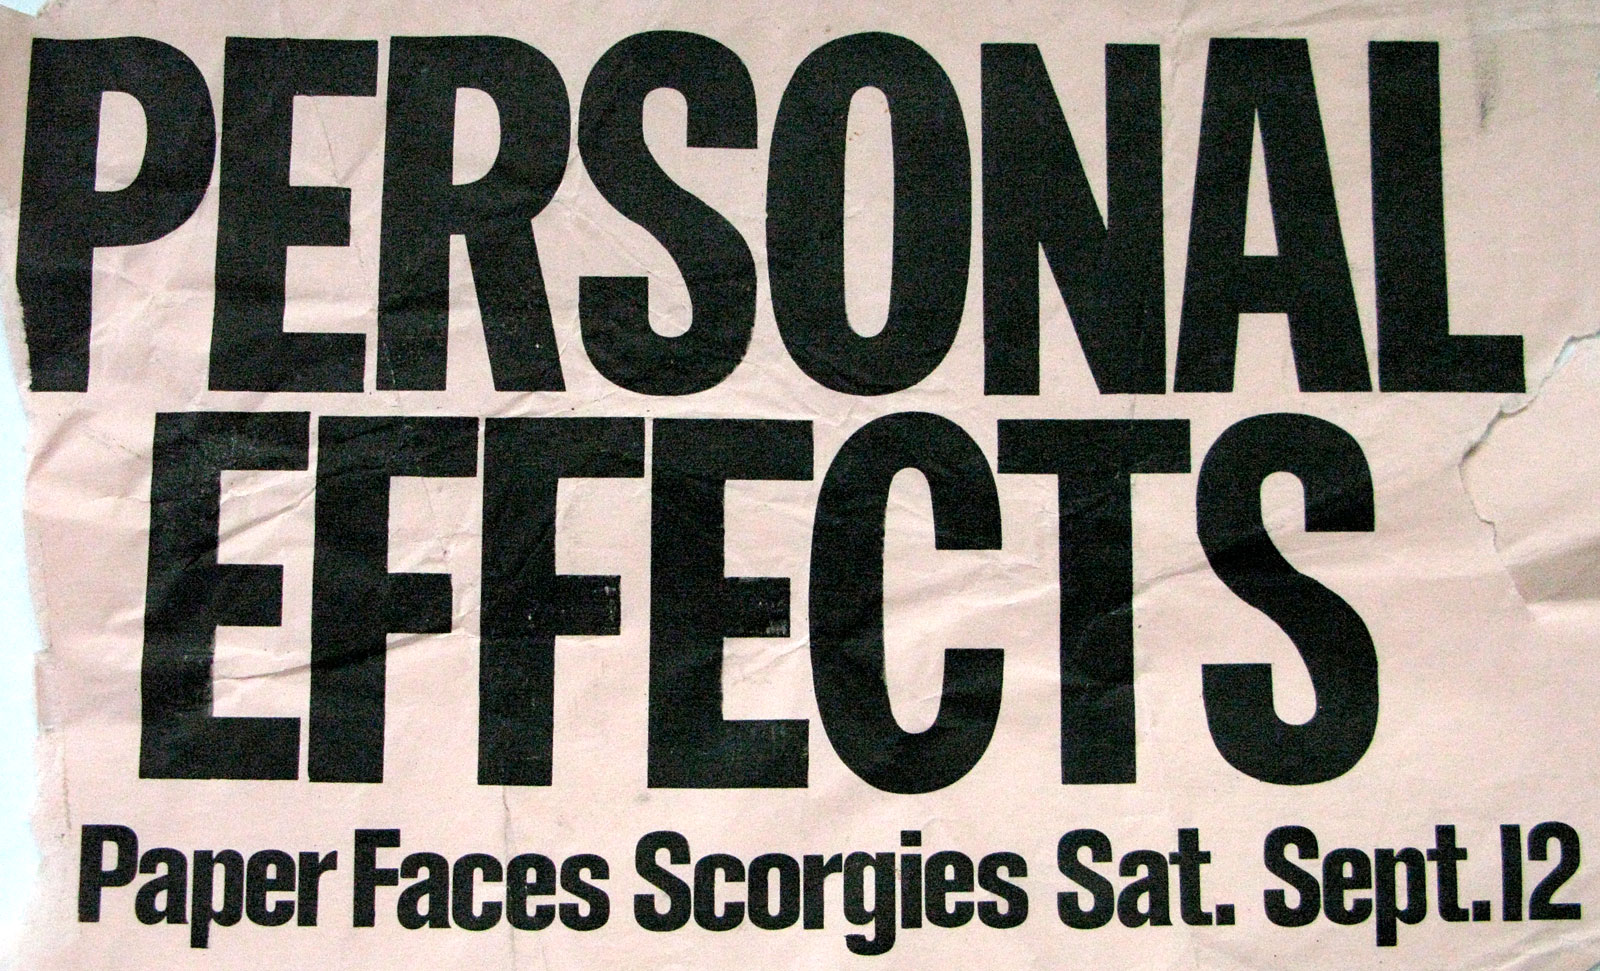 Poster for Personal Effects with Paper Faces at Scorgie's in Rochester, New York on Saturday 09.12.1981